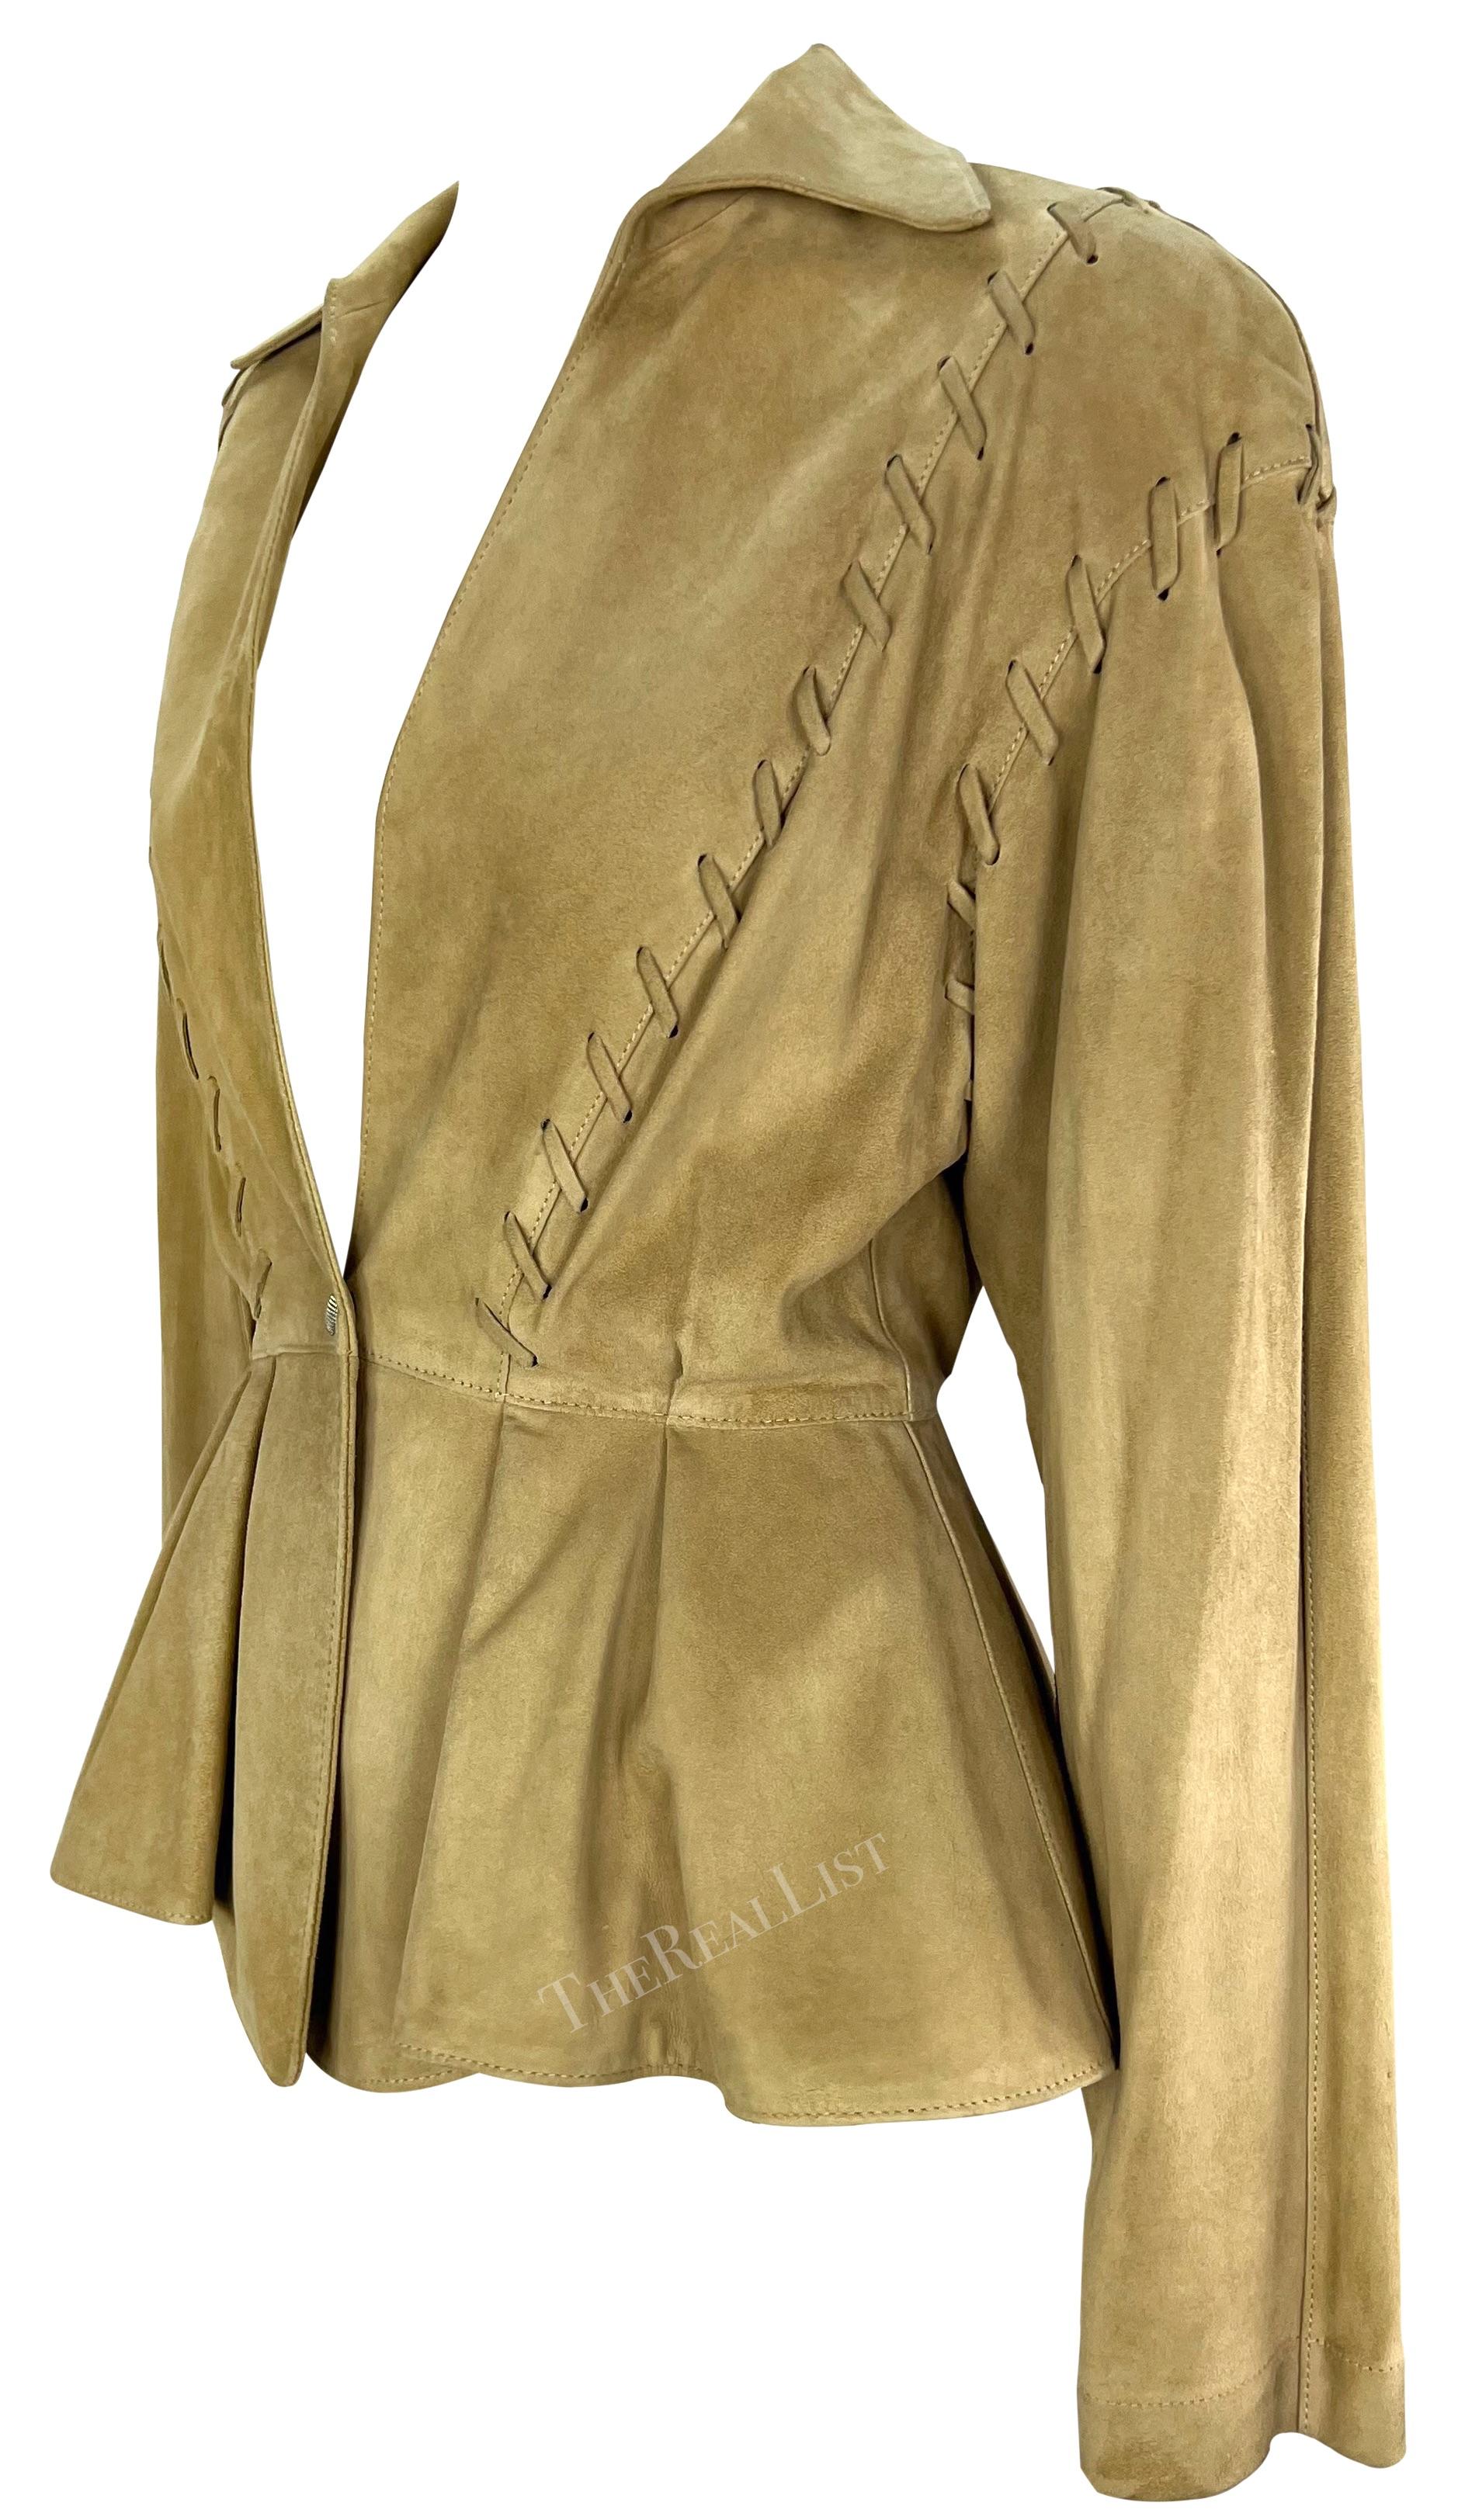 1990s Thierry Mugler Tan Suede Leather Plunging Western Whipstitch Jacket In Good Condition For Sale In West Hollywood, CA